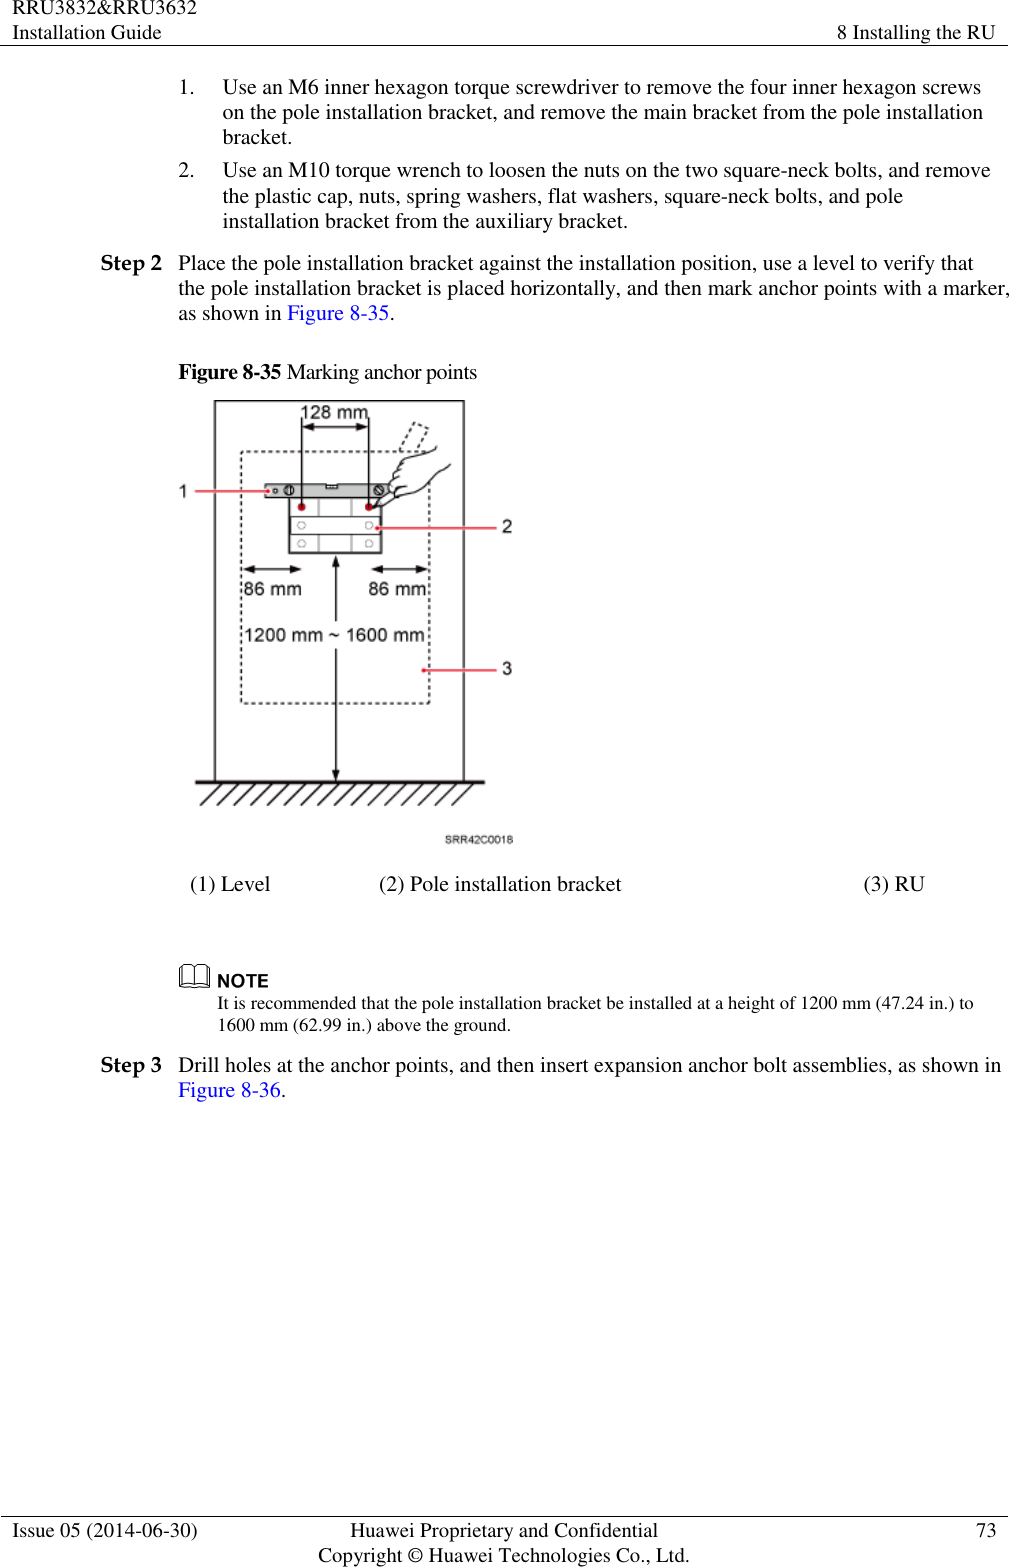 RRU3832&amp;RRU3632 Installation Guide 8 Installing the RU  Issue 05 (2014-06-30) Huawei Proprietary and Confidential                                     Copyright © Huawei Technologies Co., Ltd. 73  1. Use an M6 inner hexagon torque screwdriver to remove the four inner hexagon screws on the pole installation bracket, and remove the main bracket from the pole installation bracket. 2. Use an M10 torque wrench to loosen the nuts on the two square-neck bolts, and remove the plastic cap, nuts, spring washers, flat washers, square-neck bolts, and pole installation bracket from the auxiliary bracket. Step 2 Place the pole installation bracket against the installation position, use a level to verify that the pole installation bracket is placed horizontally, and then mark anchor points with a marker, as shown in Figure 8-35. Figure 8-35 Marking anchor points  (1) Level (2) Pole installation bracket (3) RU   It is recommended that the pole installation bracket be installed at a height of 1200 mm (47.24 in.) to 1600 mm (62.99 in.) above the ground. Step 3 Drill holes at the anchor points, and then insert expansion anchor bolt assemblies, as shown in Figure 8-36. 